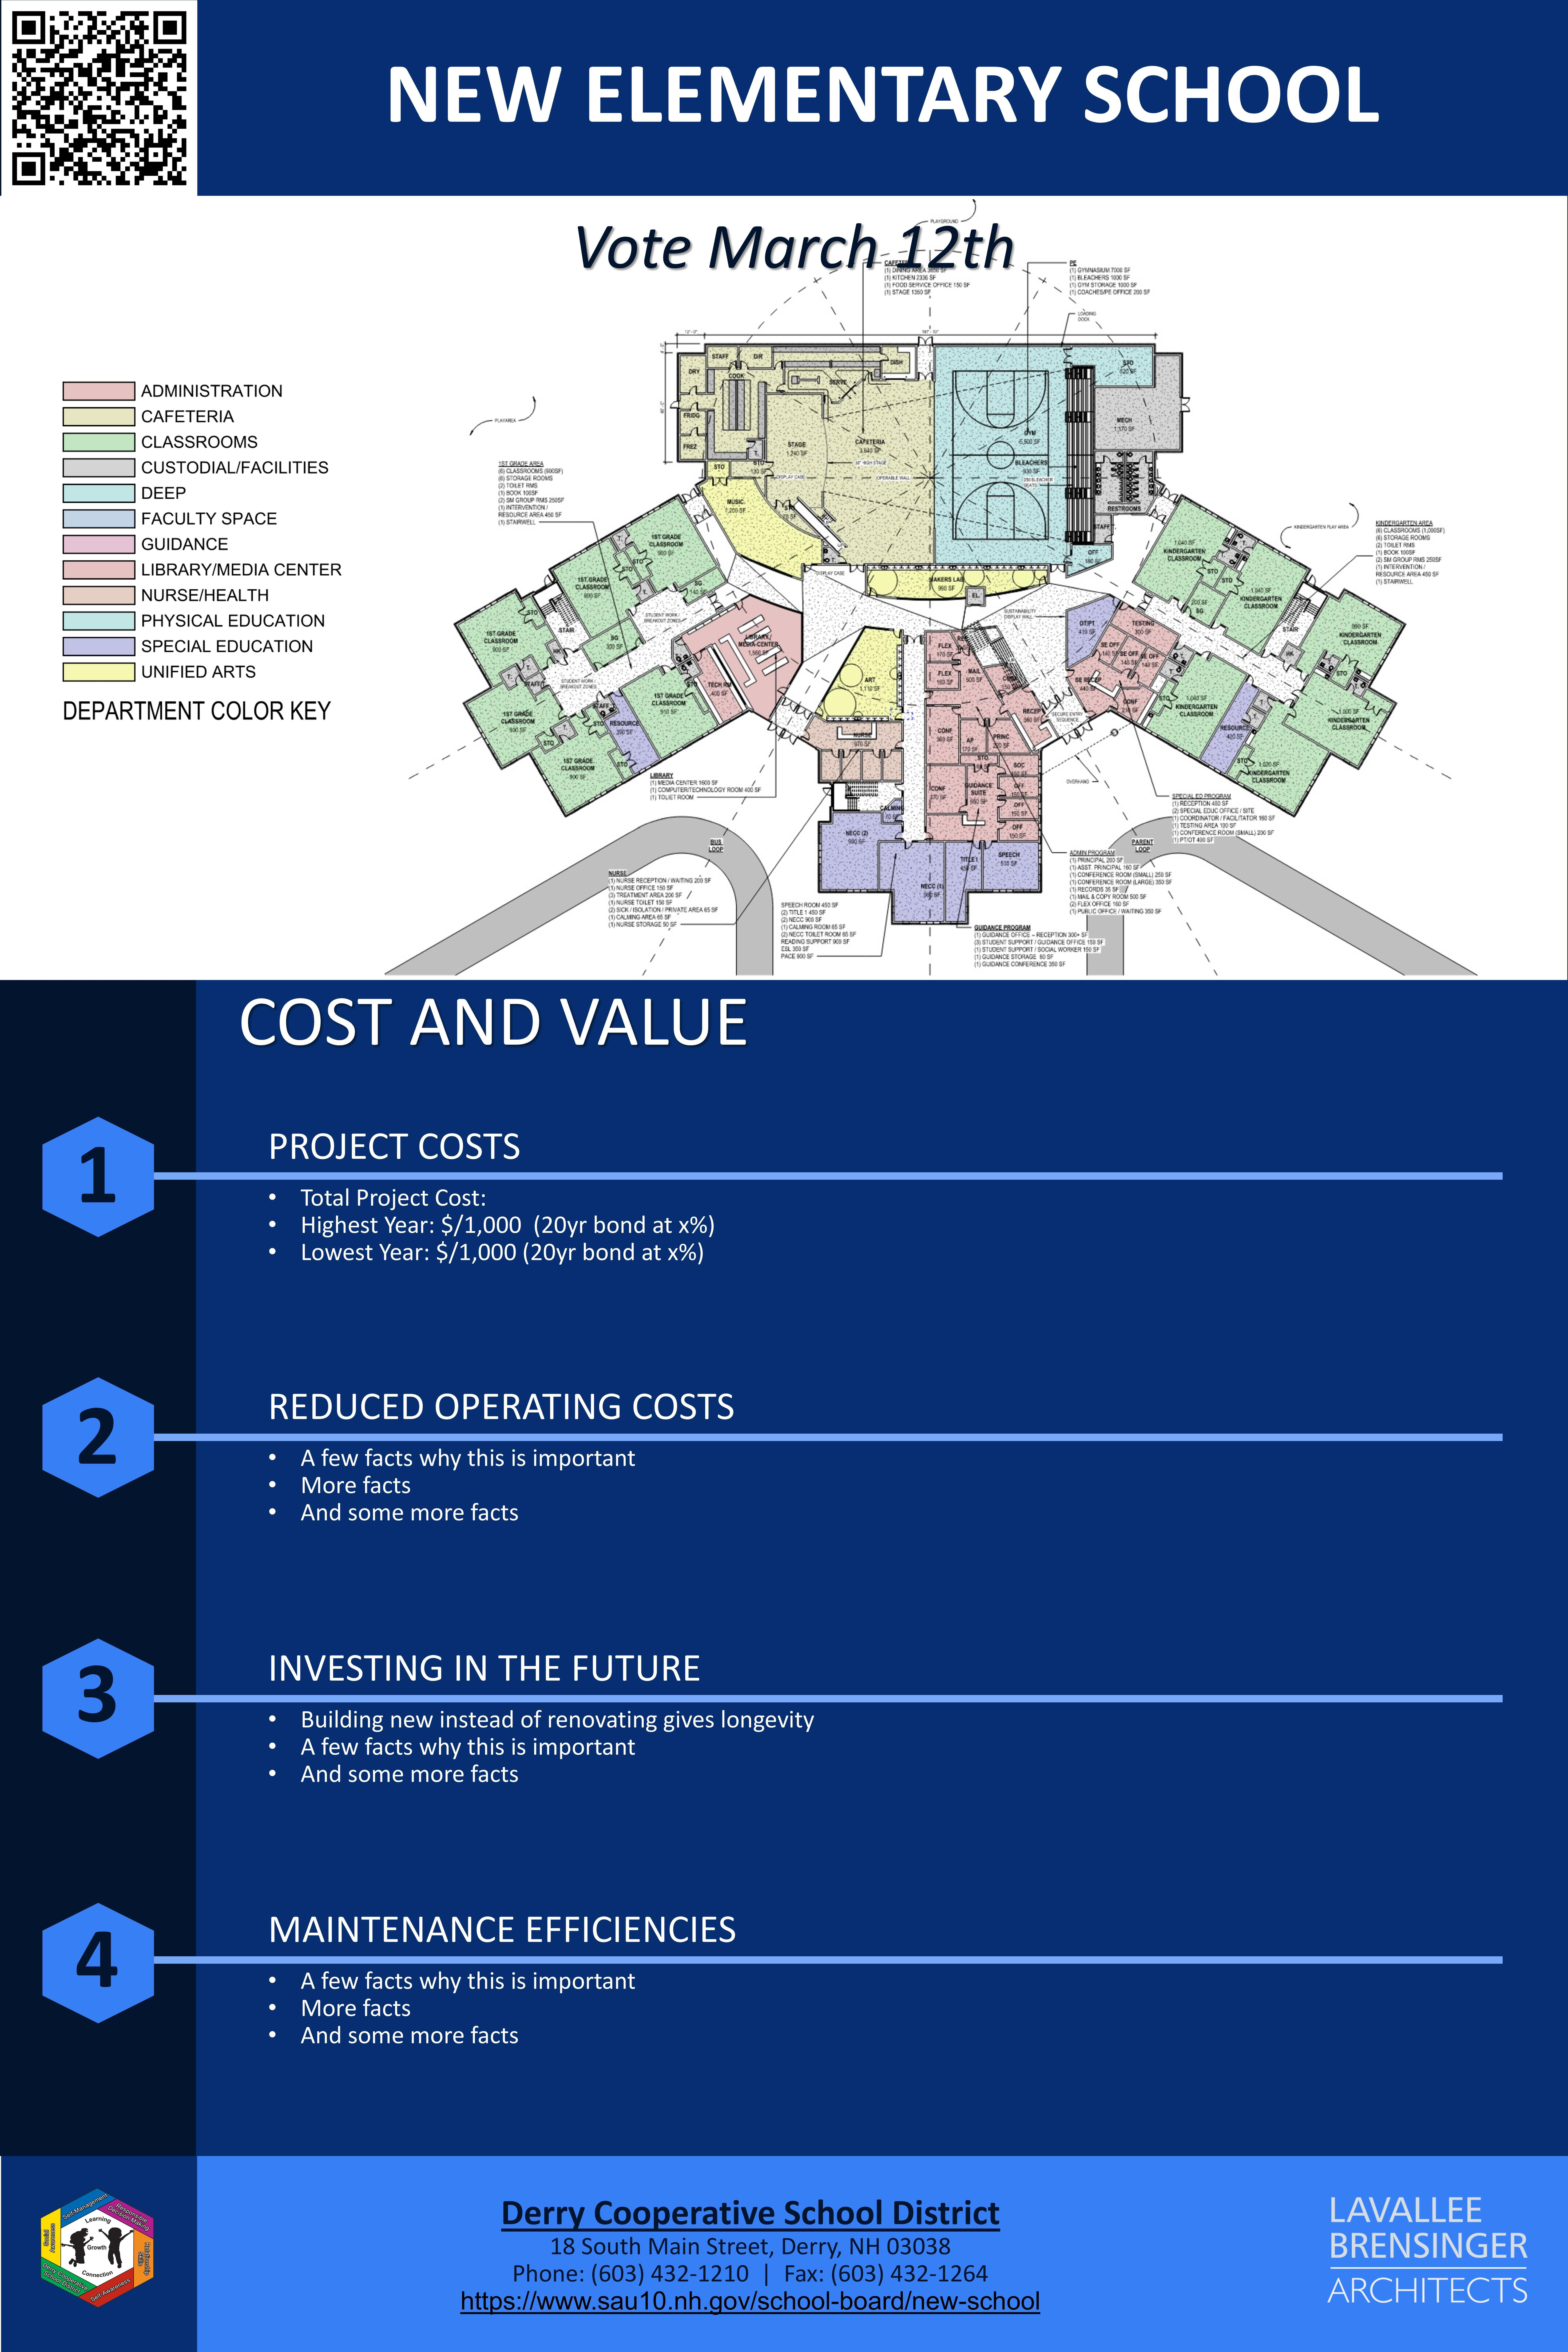 Read More New Elementary School Cost and Value